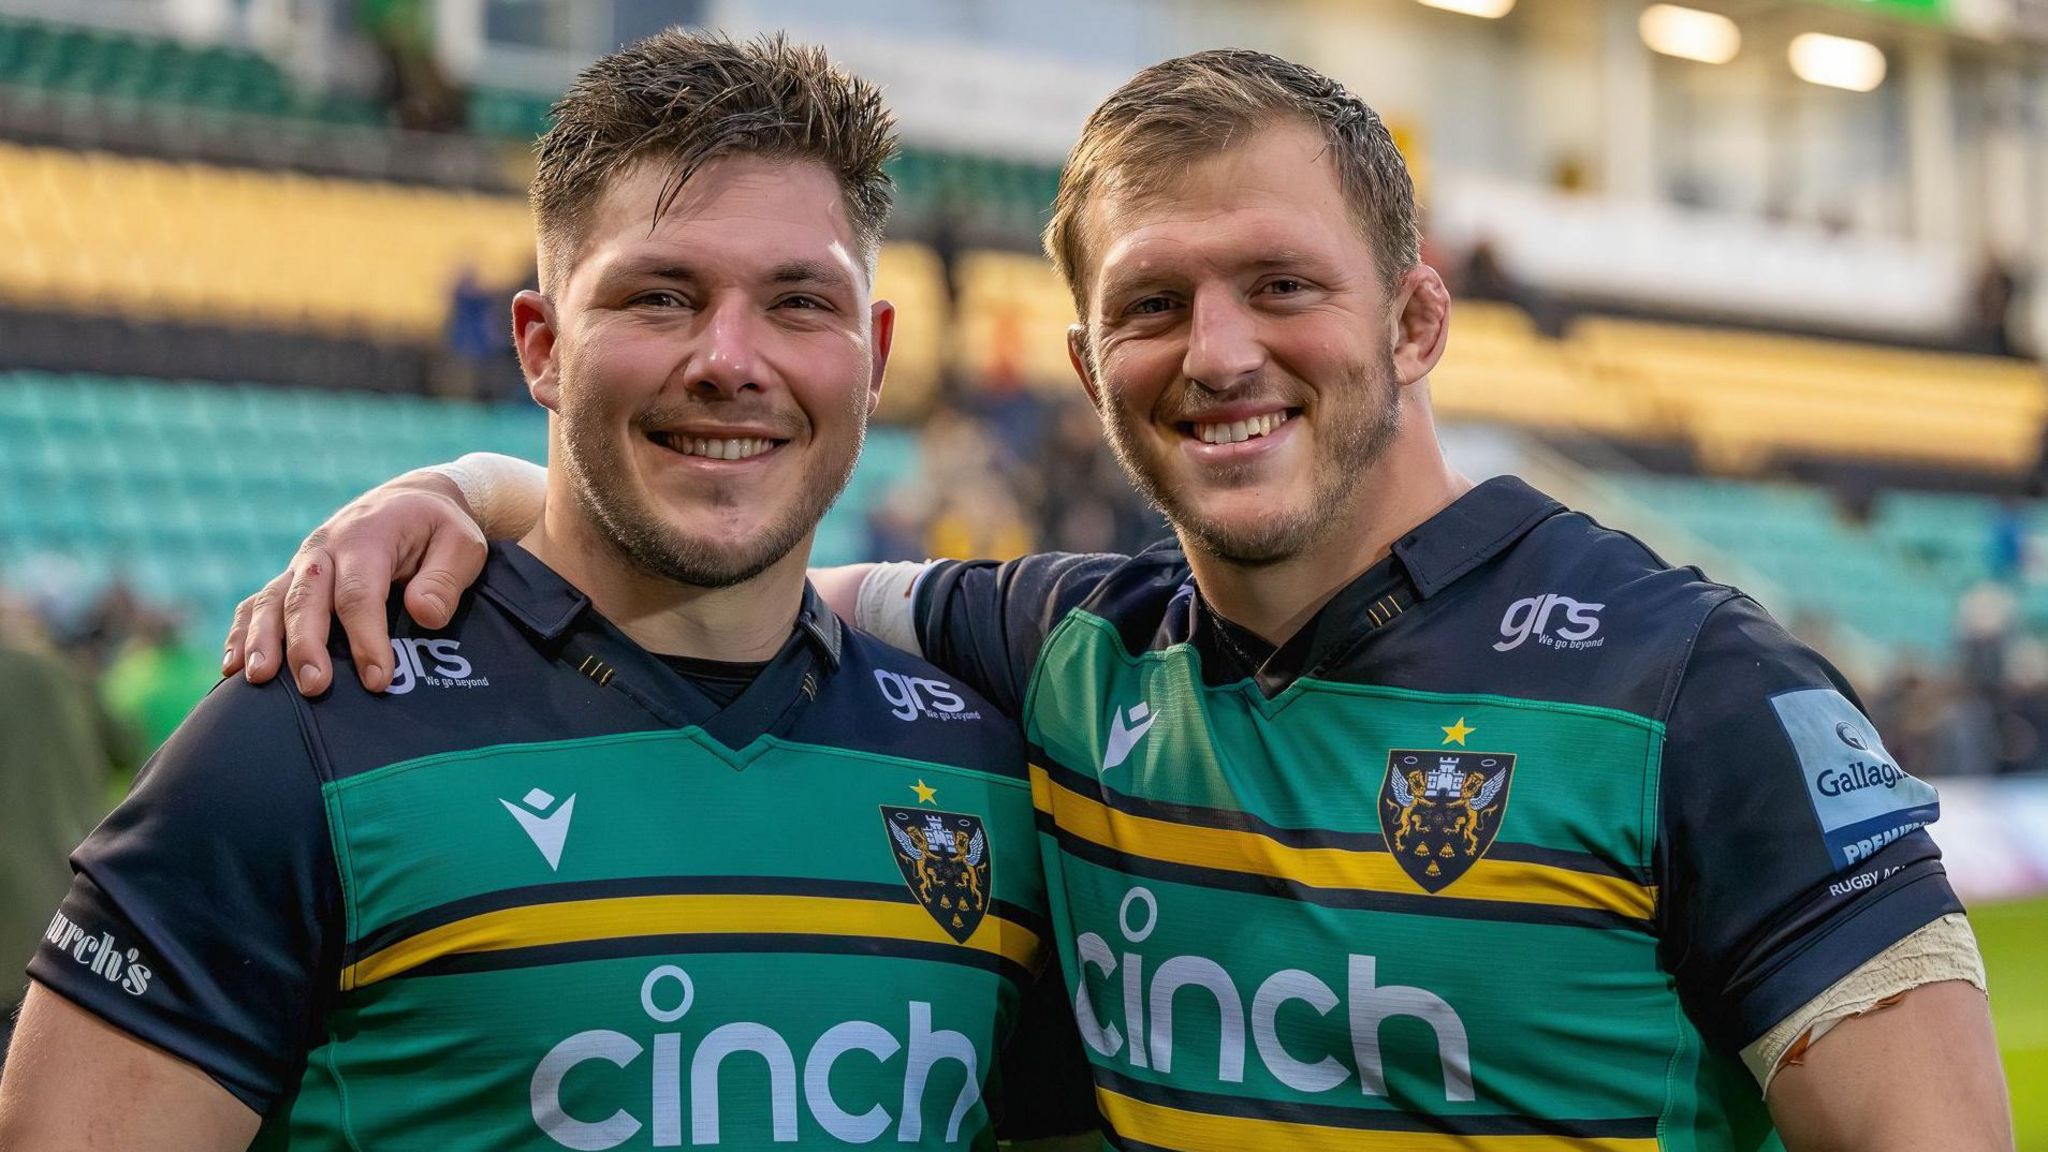 Ethan and Alex Waller in Saint's kit